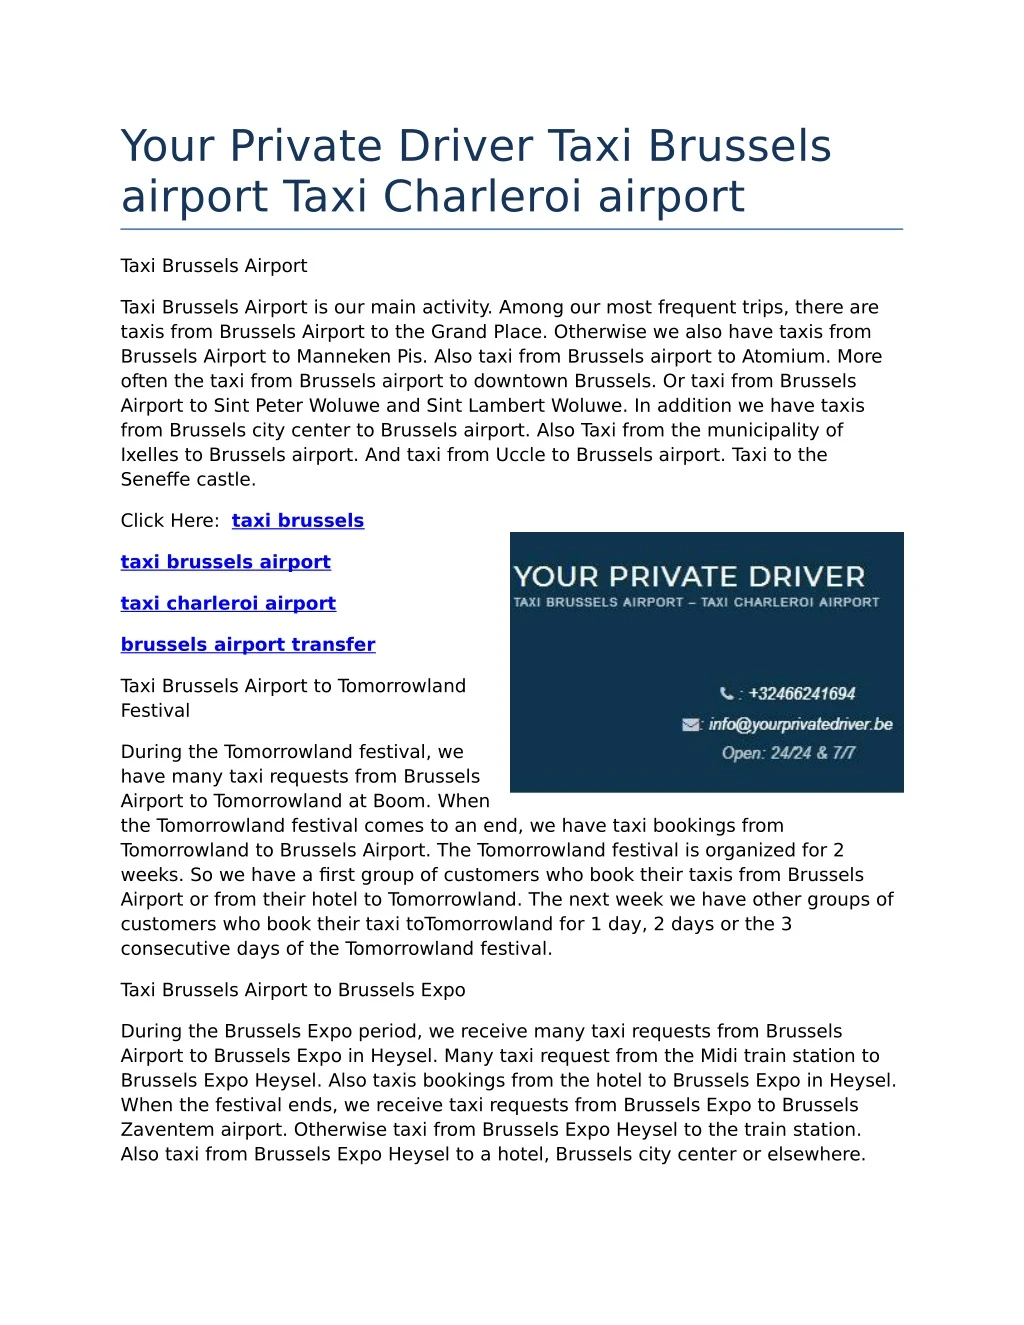 your private driver taxi brussels airport taxi